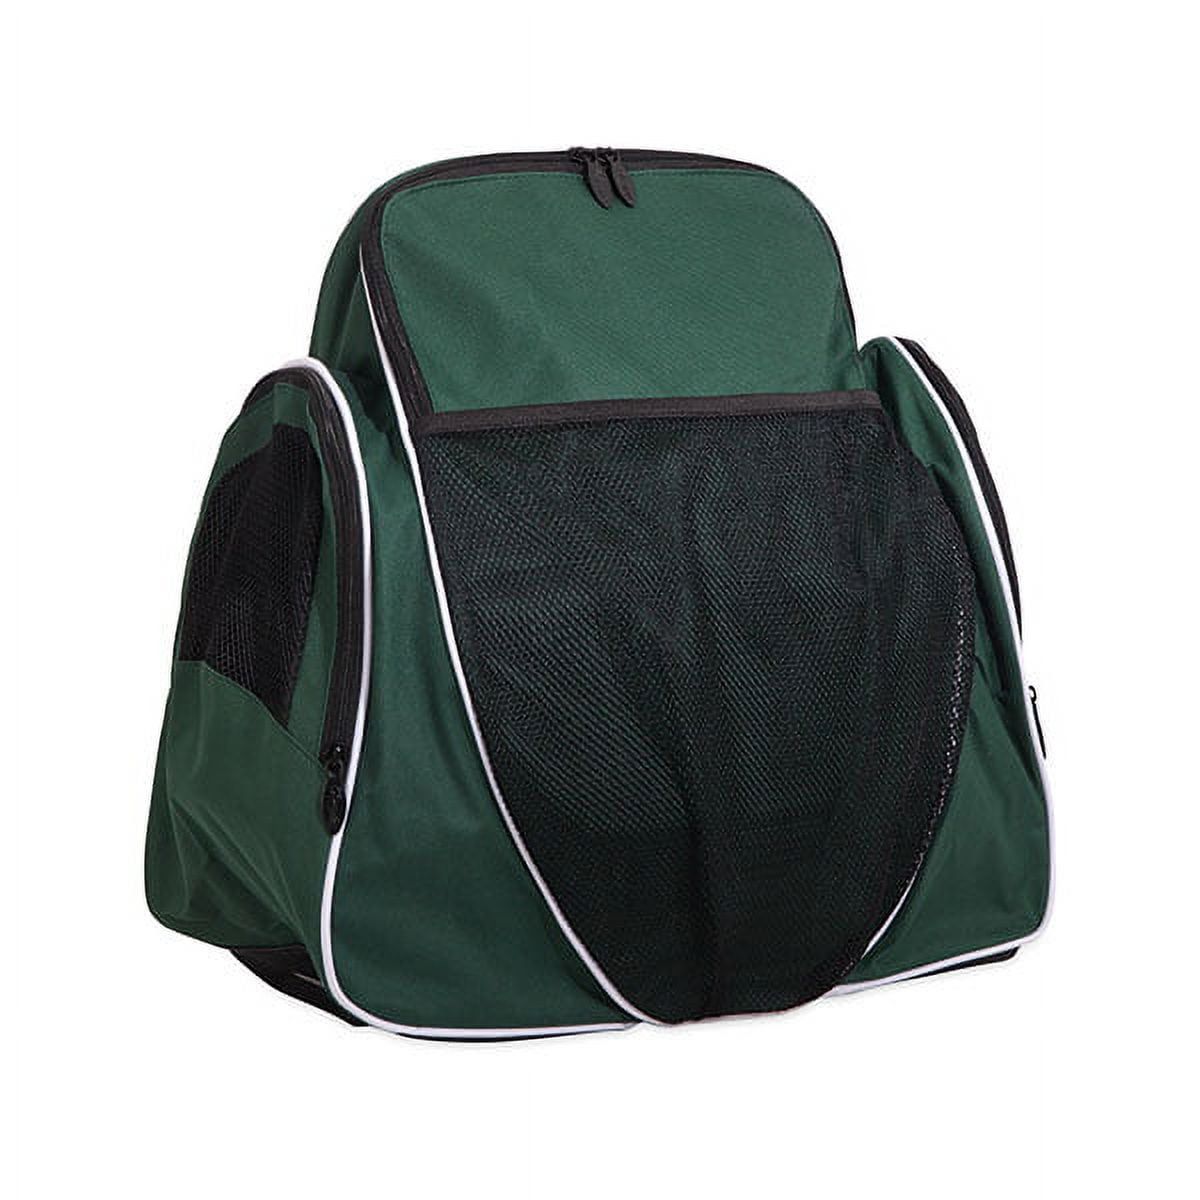 18 X 19 X 10 In. Deluxe All Purpose Backpack, Dark Green